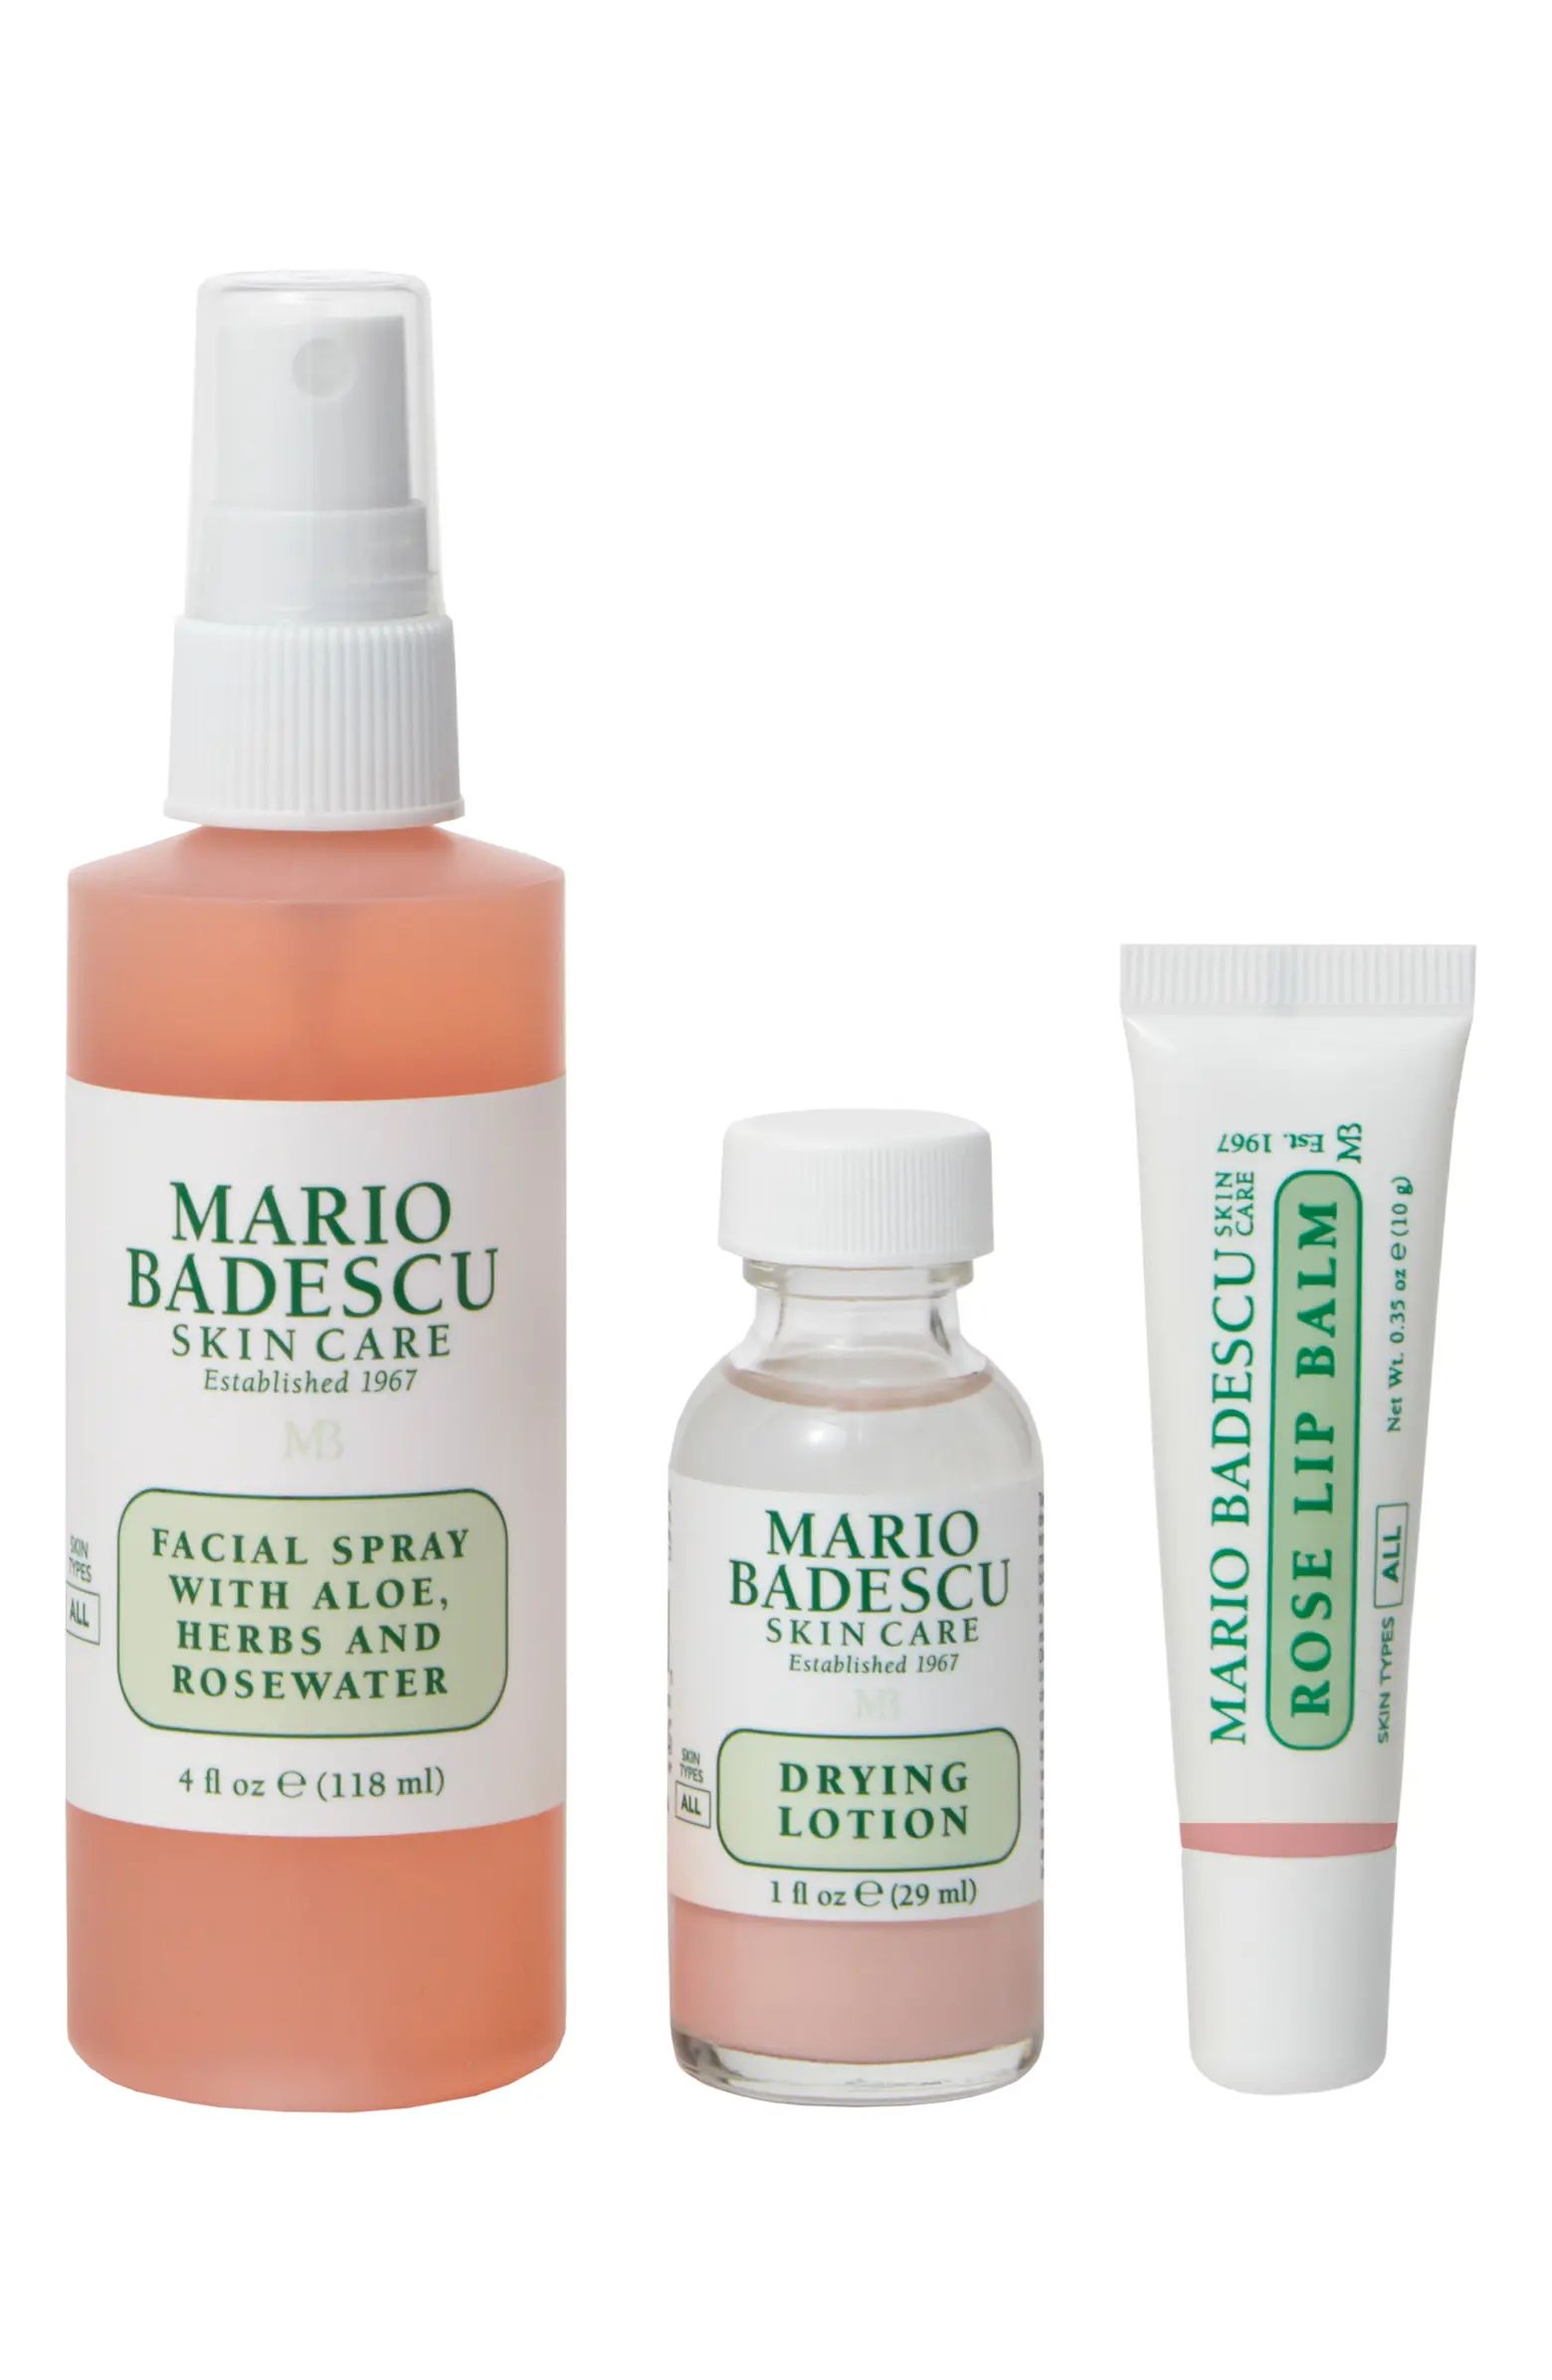 Mario Badescu Full Size Drying Lotion, Face Mist & Lip Balm Set-$33 Value | Nordstrom | Nordstrom